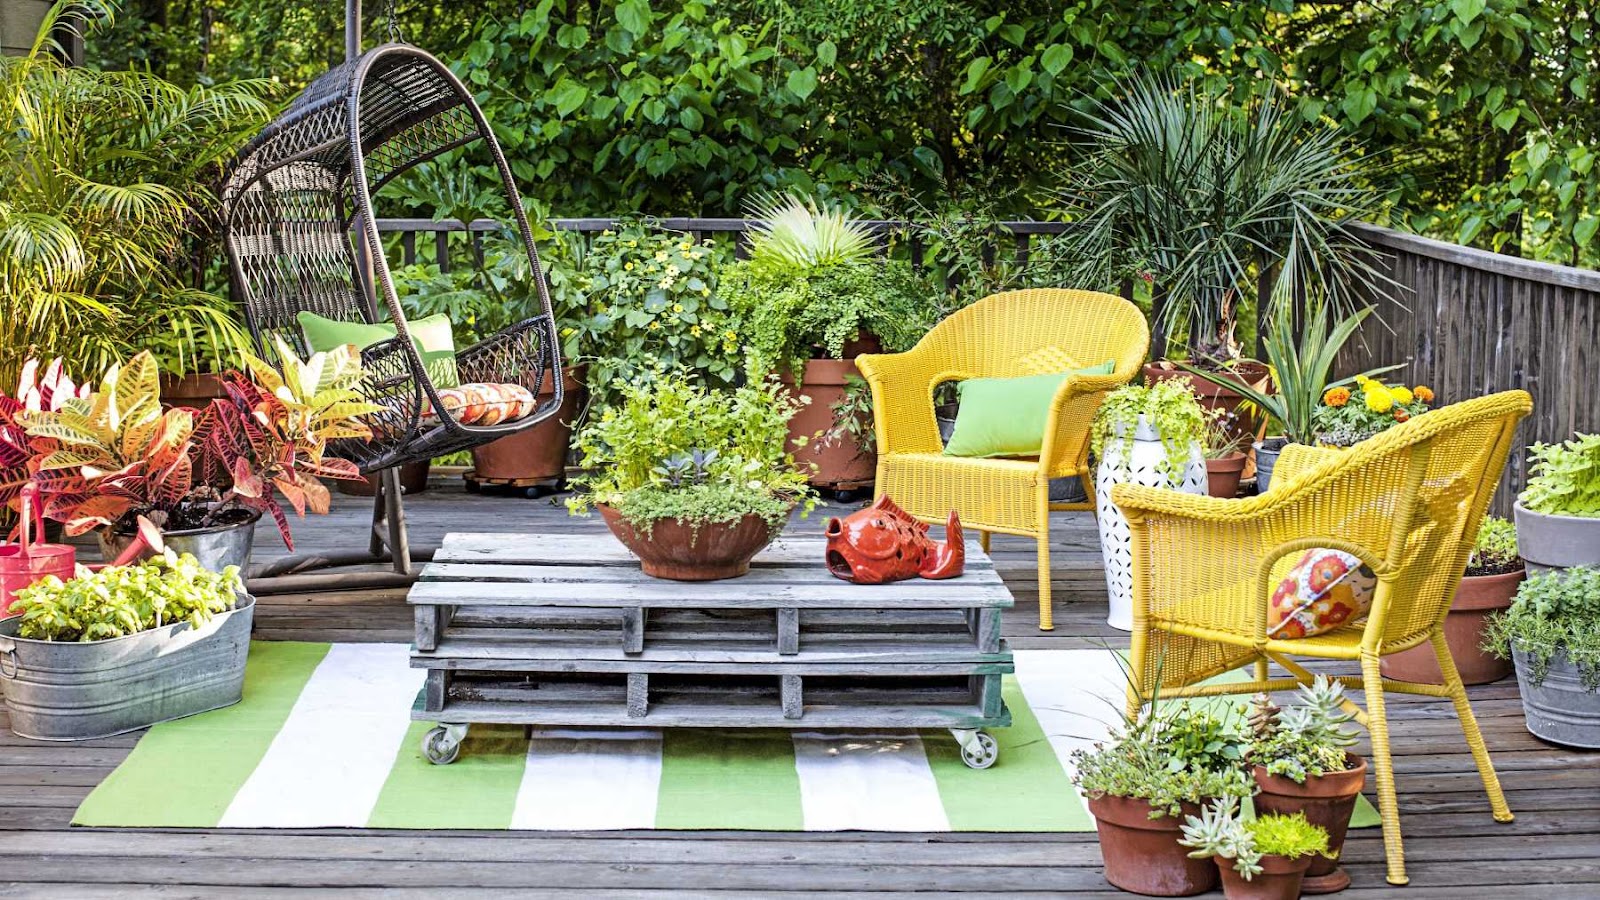 Live outdoor space filled with colorful and interesting furniture and small decor